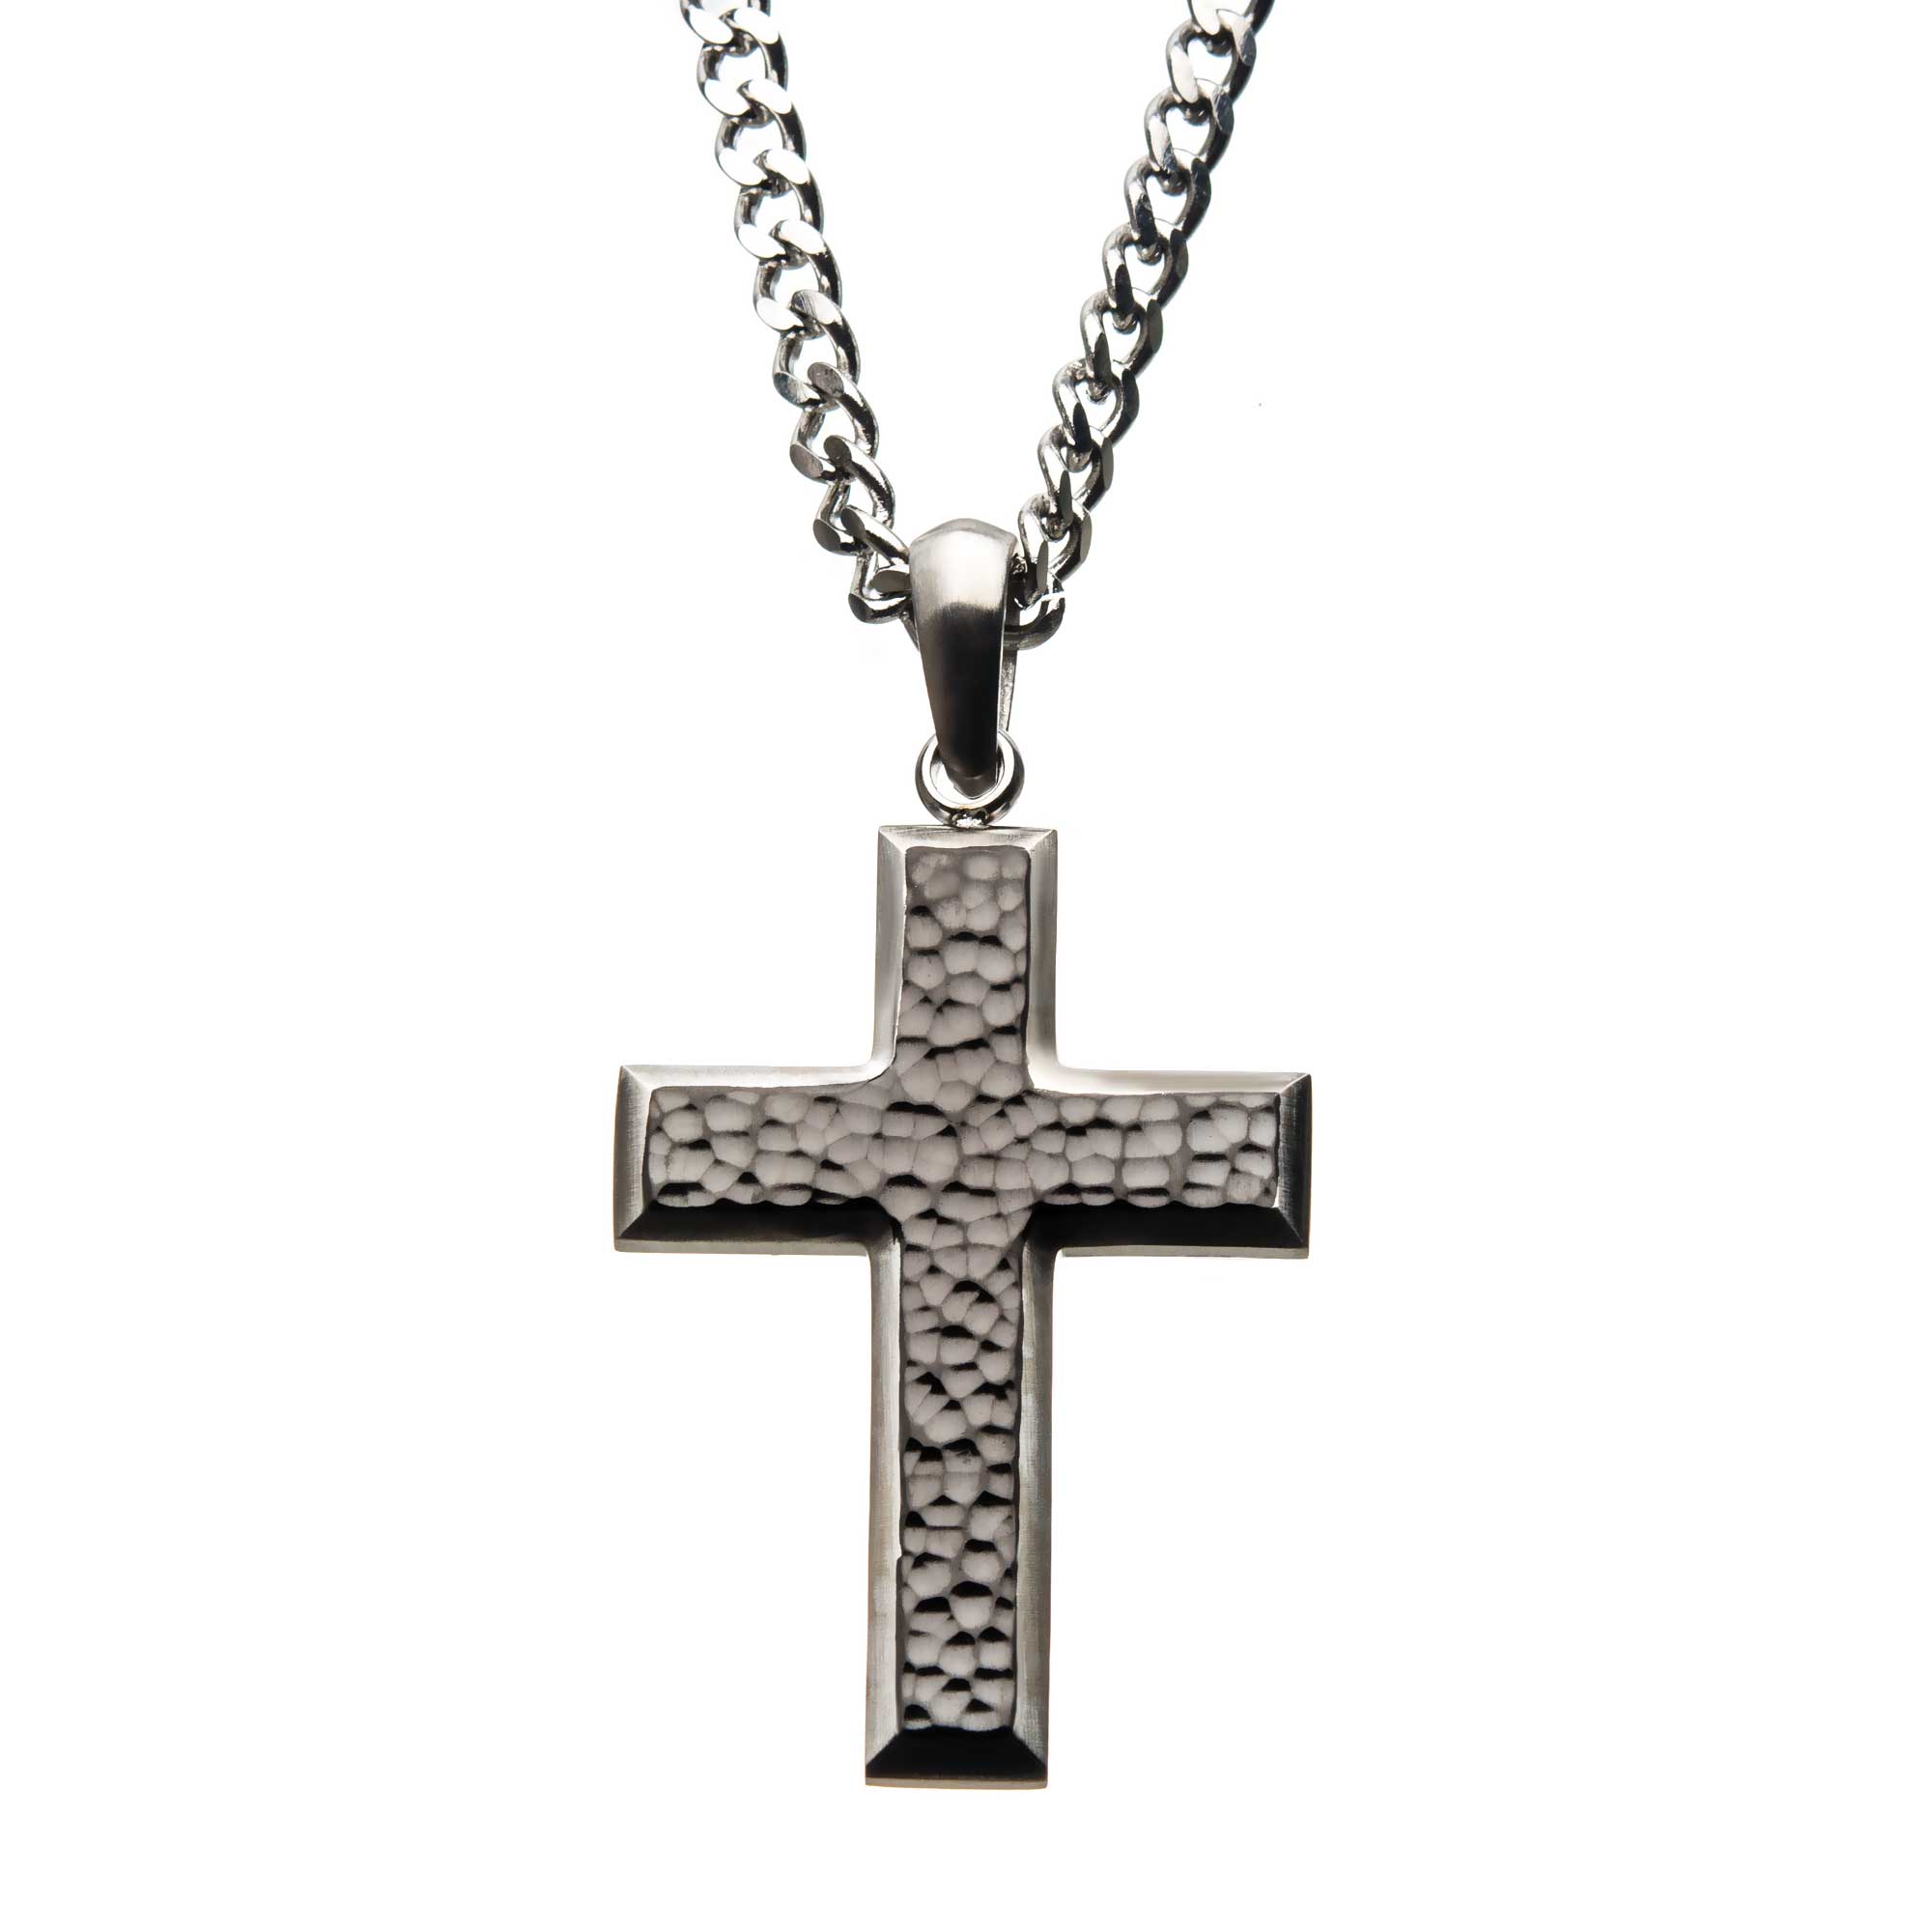 Stainless Steel Hammered Cross Pendant with Chain Midtown Diamonds Reno, NV